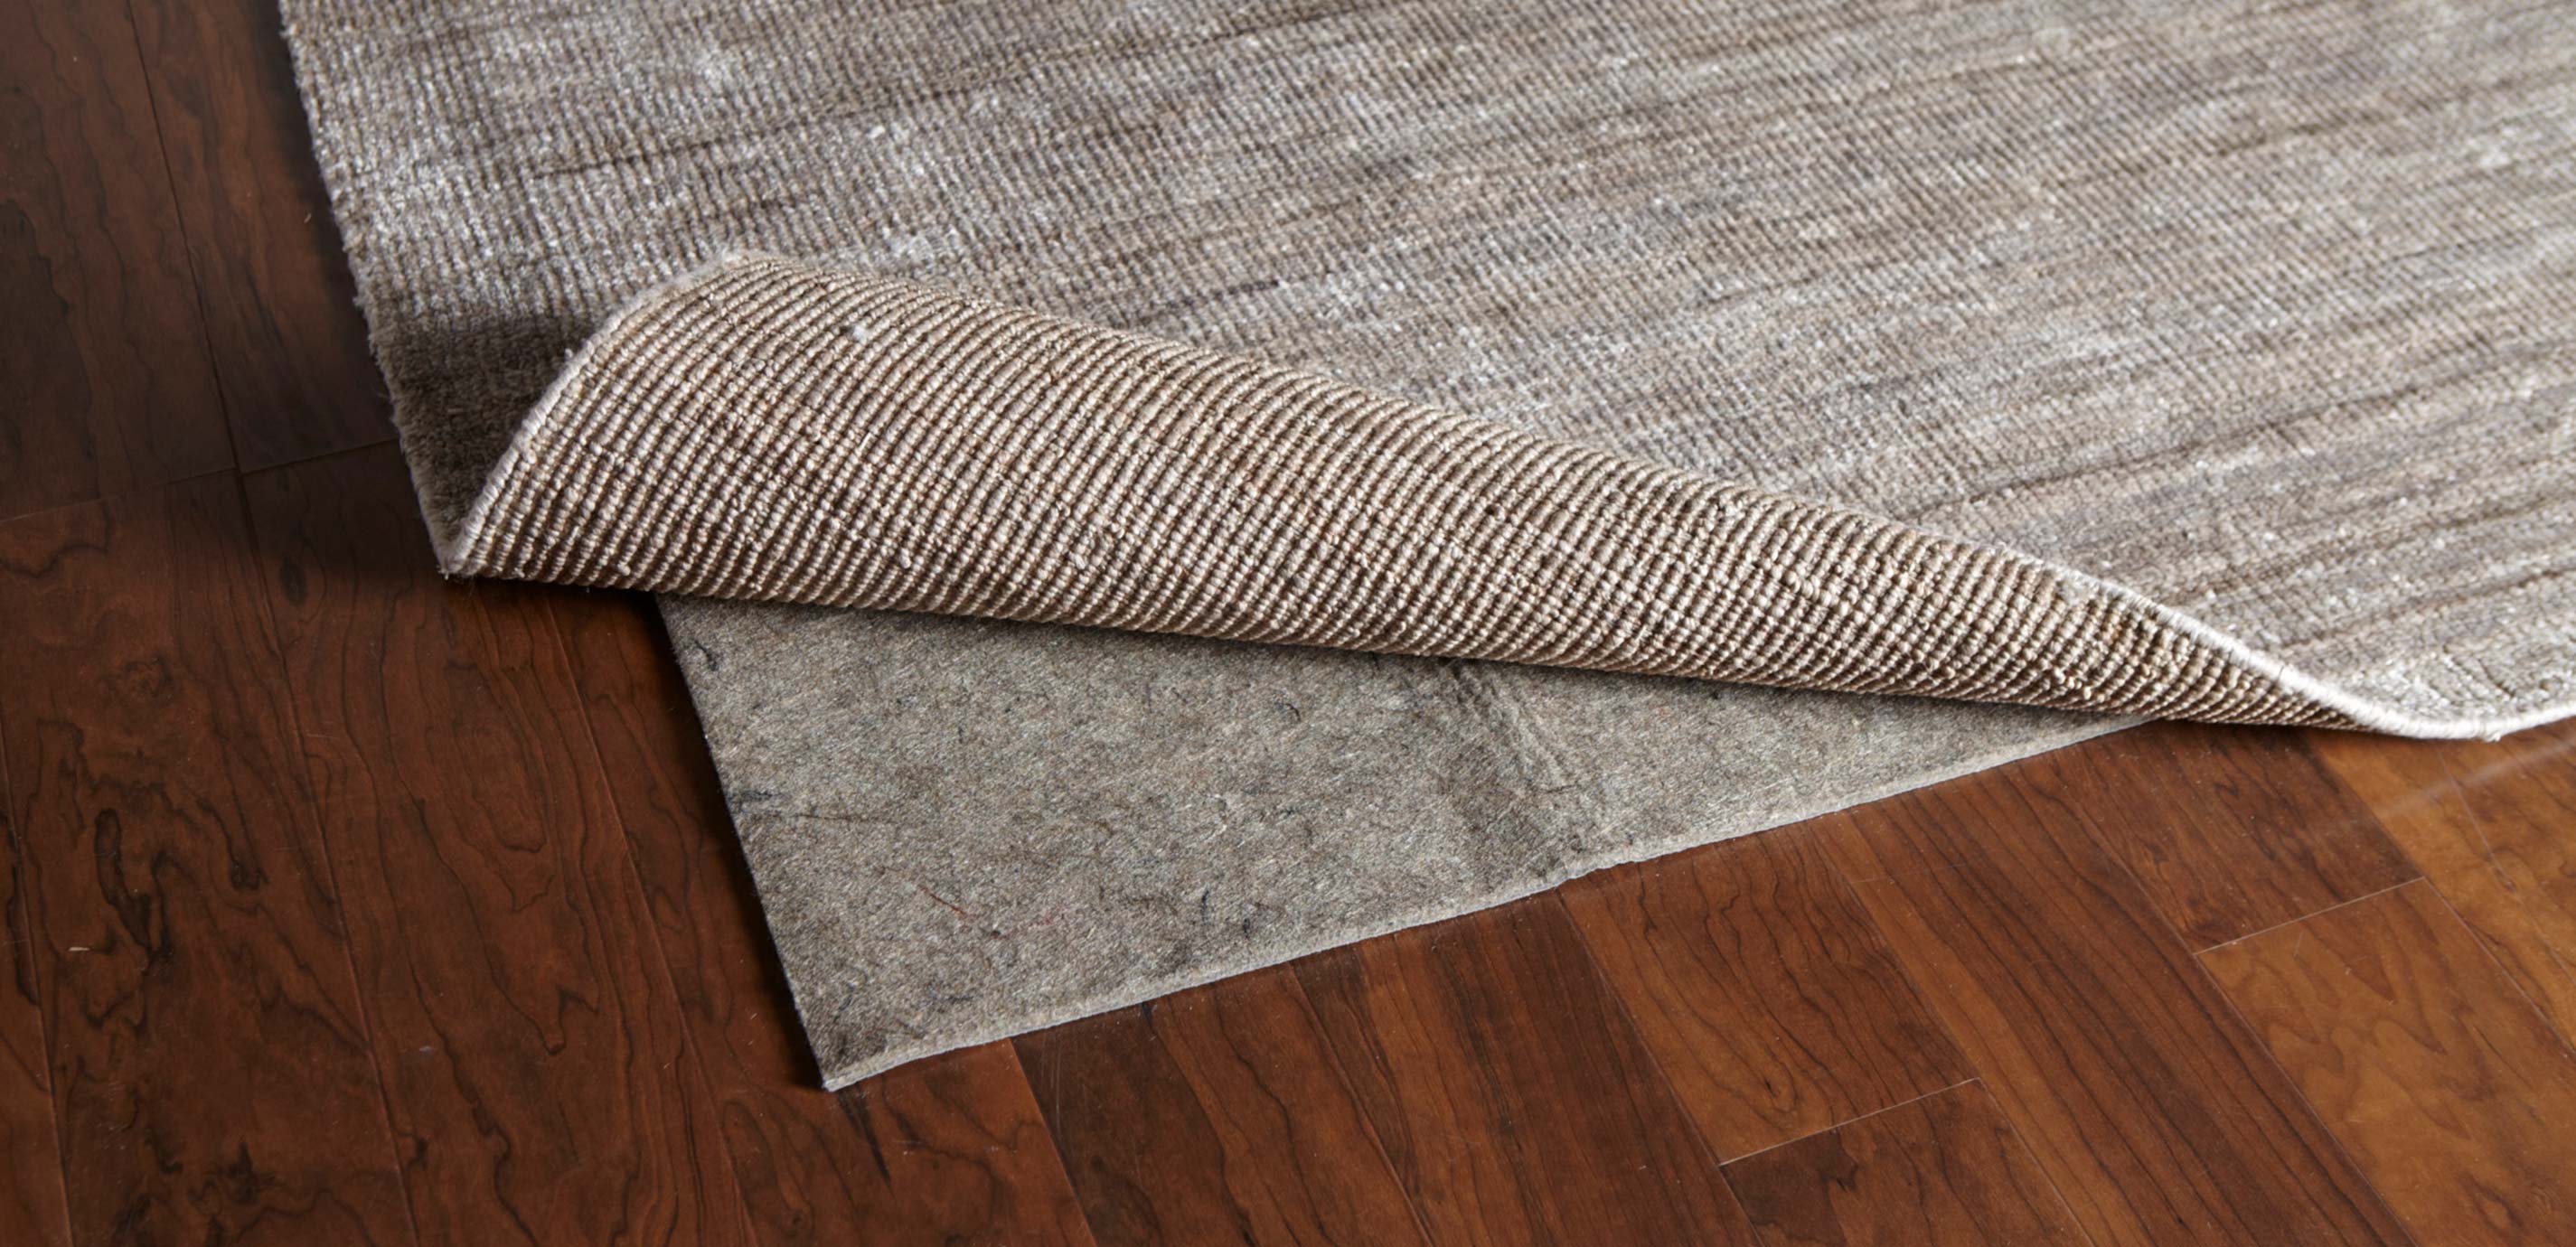 Rug Pads for Laminate Floors